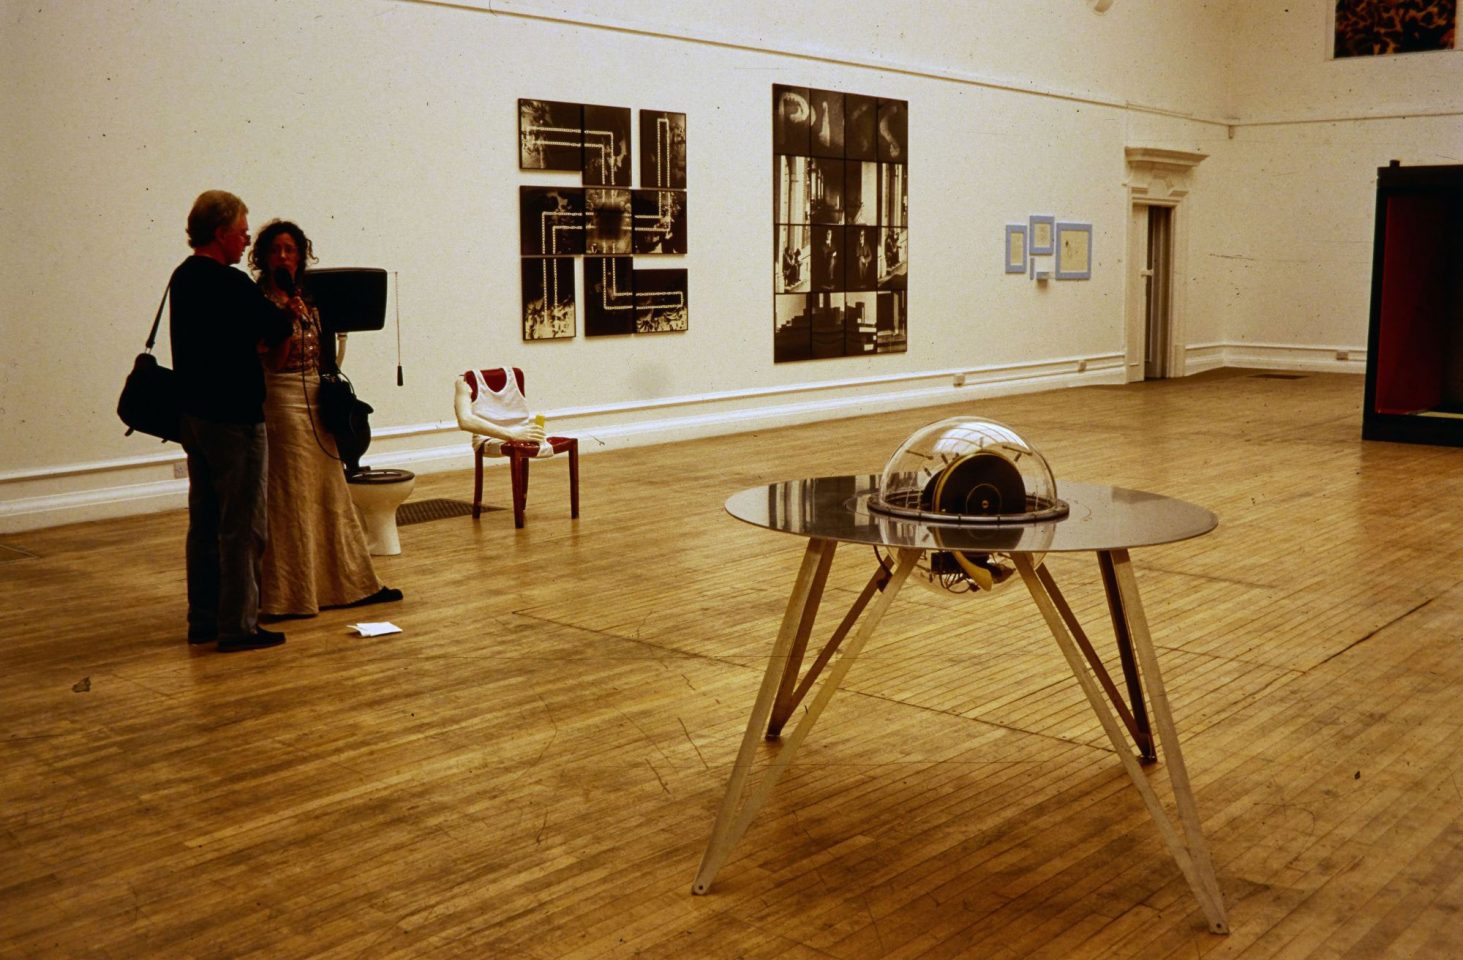 Installation view of 1995 exhibition Minky Manky including work by Sarah Lucas, Tracey Emin, Gary Hume, Damien Hirst, Matt Collishaw, Critial Decor, Stephen Pippin, Gilbert and George. Curated by Carl Freedman.
